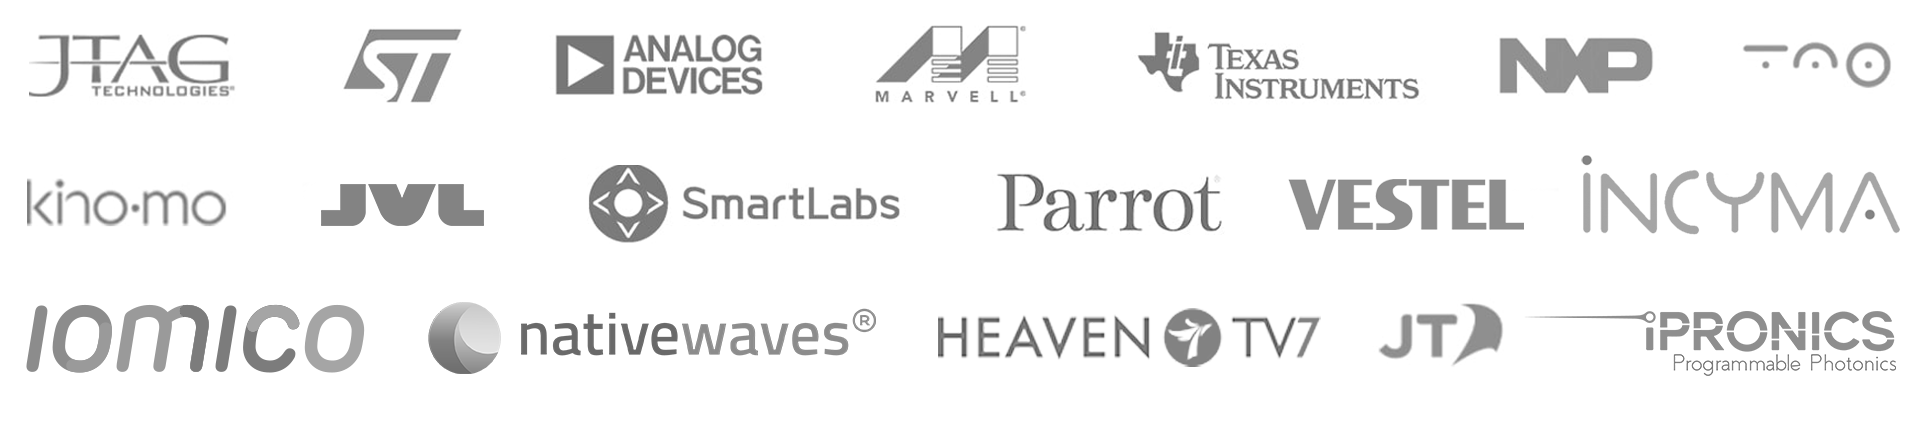 Logos of Promwad's clients